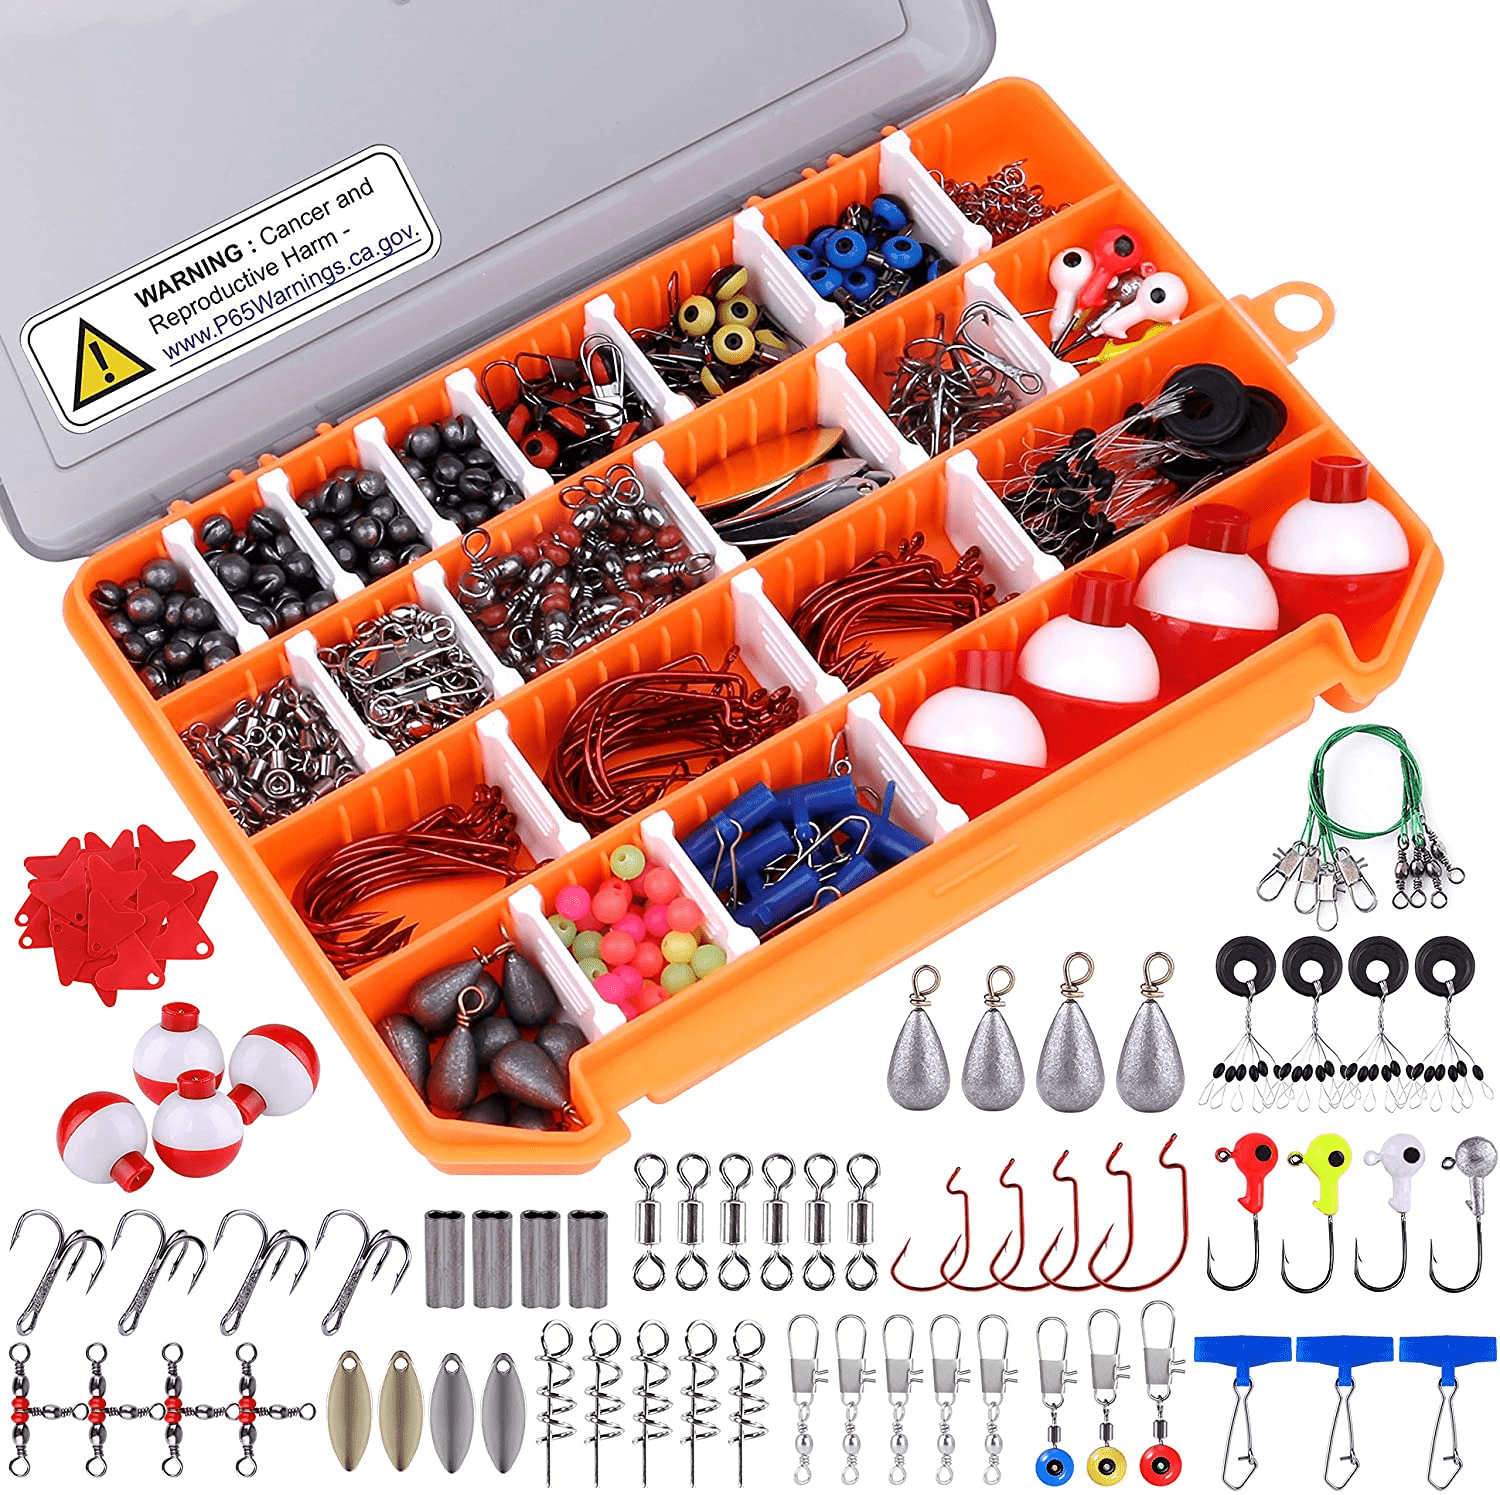 PLUSINNO Fishing Accessories Kit, Fishing Tackle Kit with Tackle Box Including Fishing Weights Sinkers, Jig Hooks, Beads, Swivel Snap, Bobbers Float, Saltwater Freshwater Fishing Gear